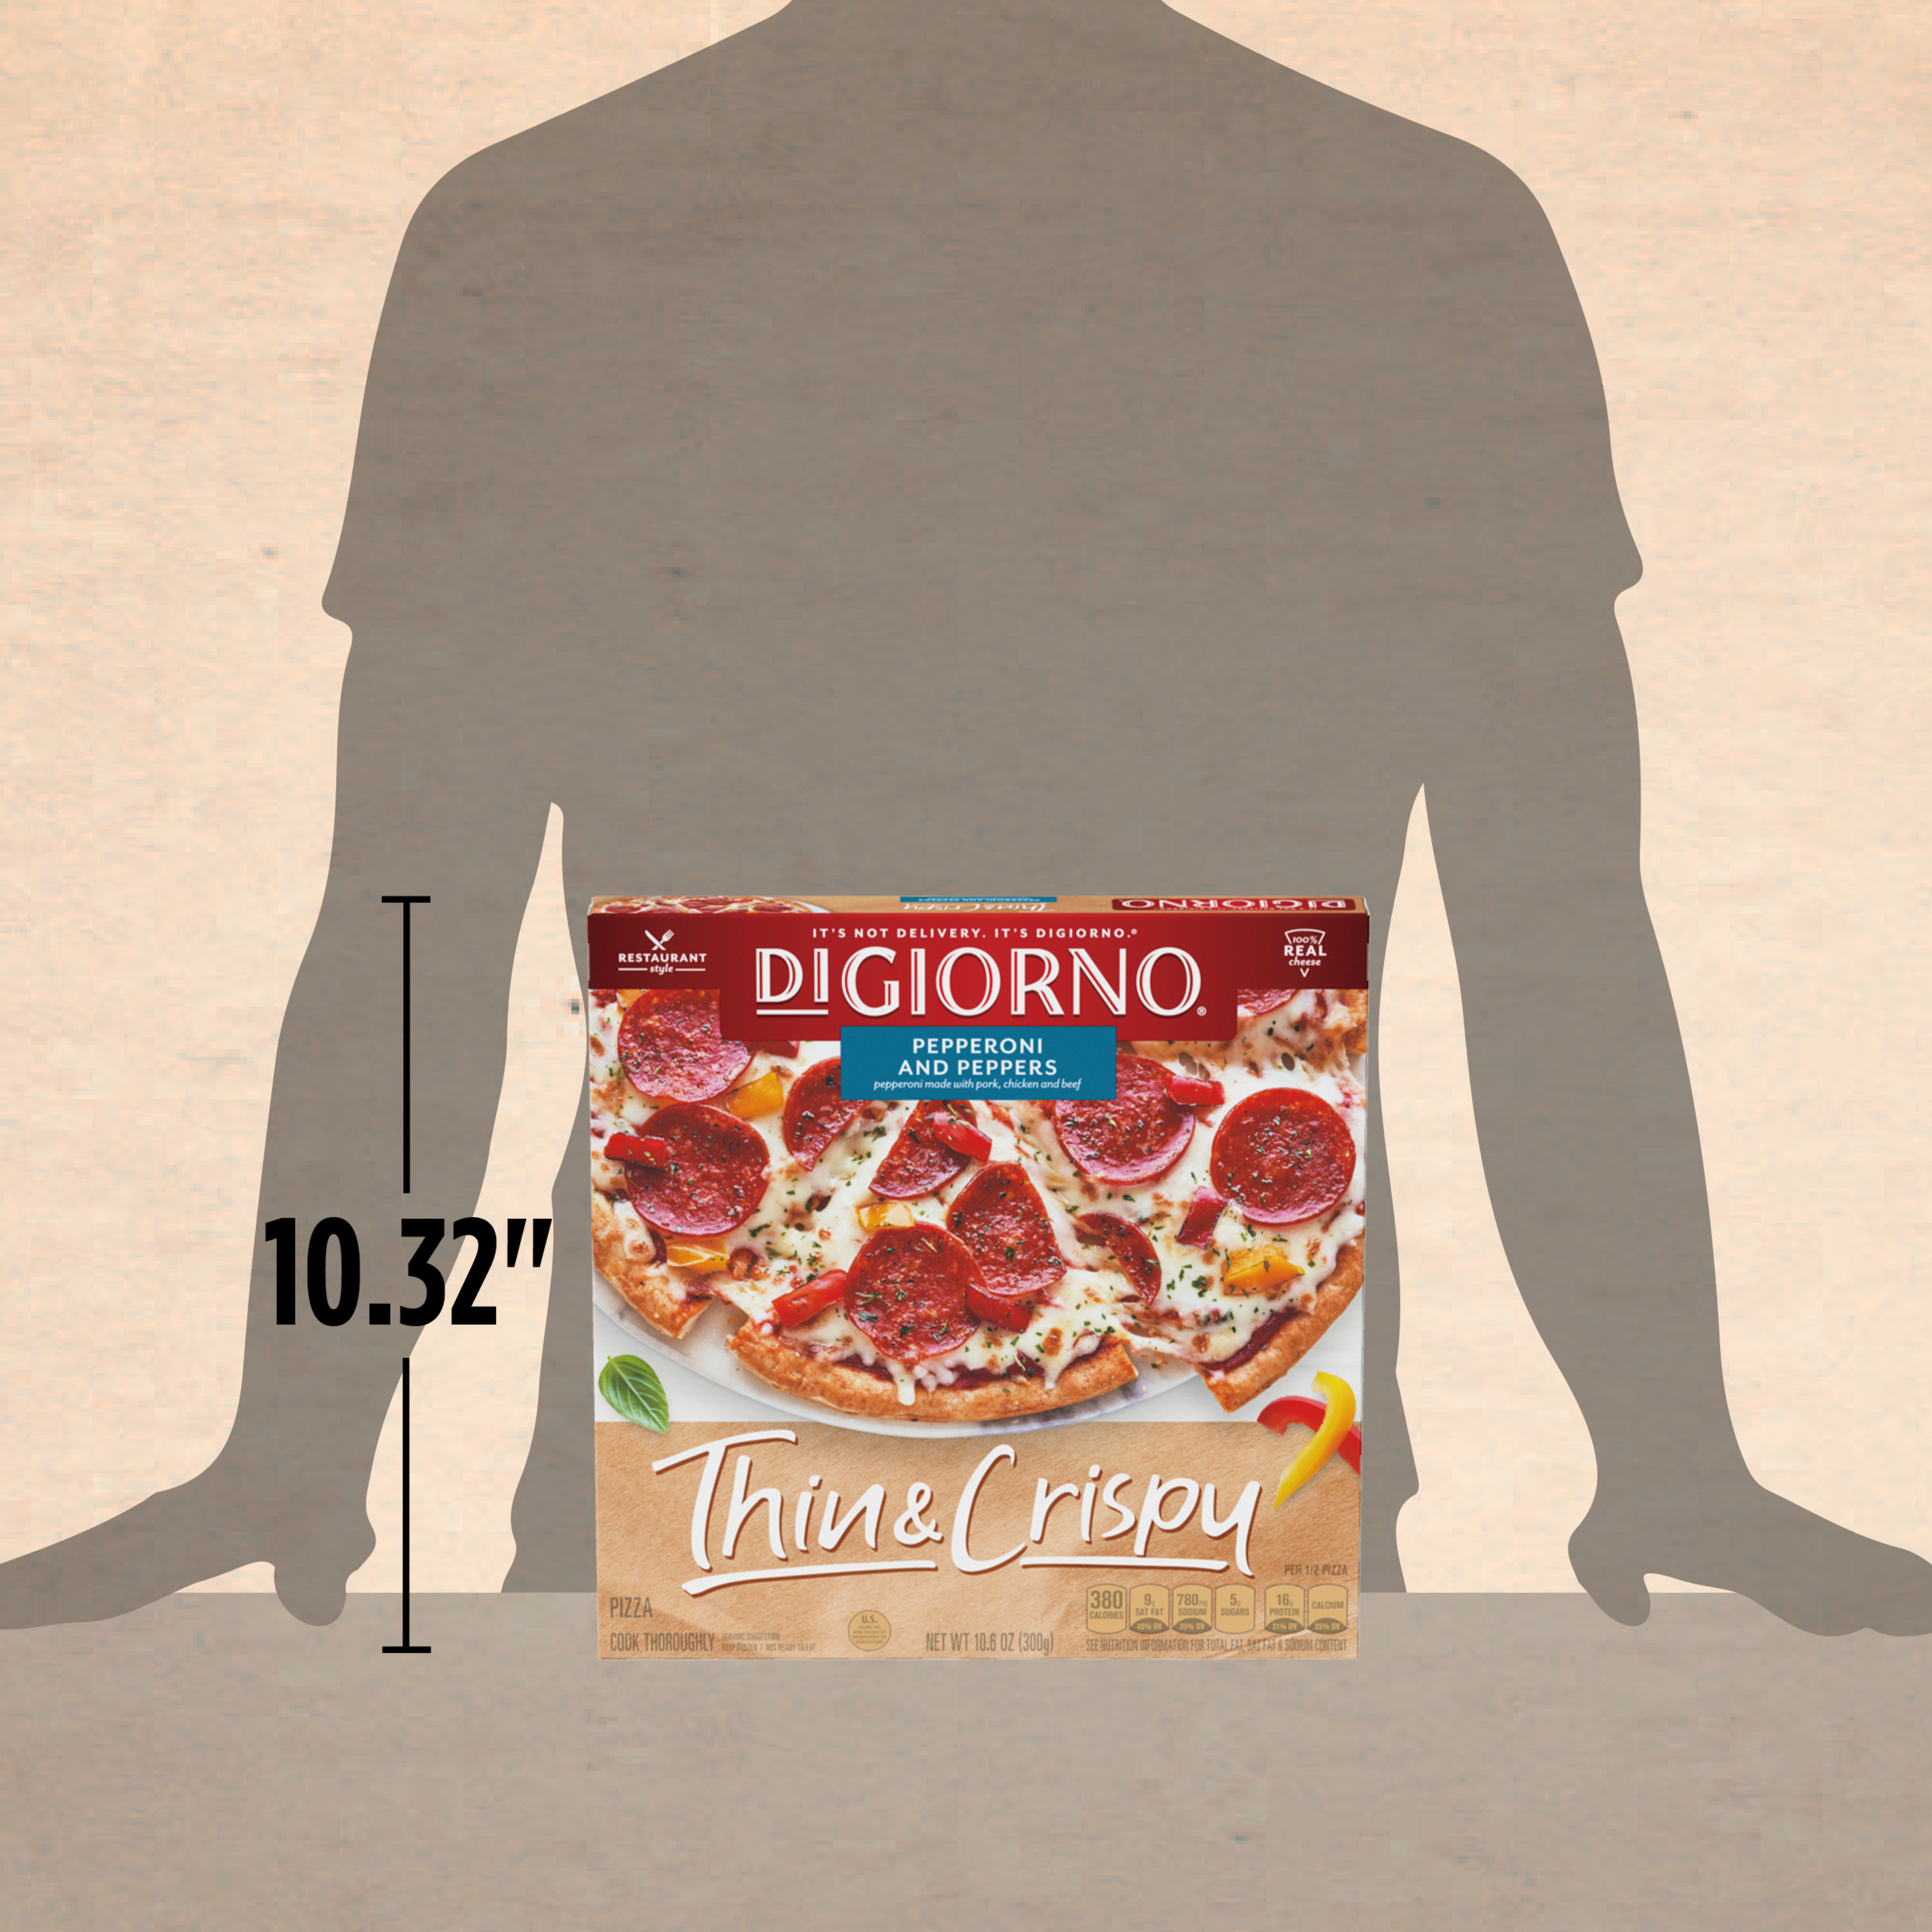 DIGIORNO Pepperoni and Peppers, Thin & Crispy Crust Pizza, 10.6 oz. (Frozen) - image 4 of 7